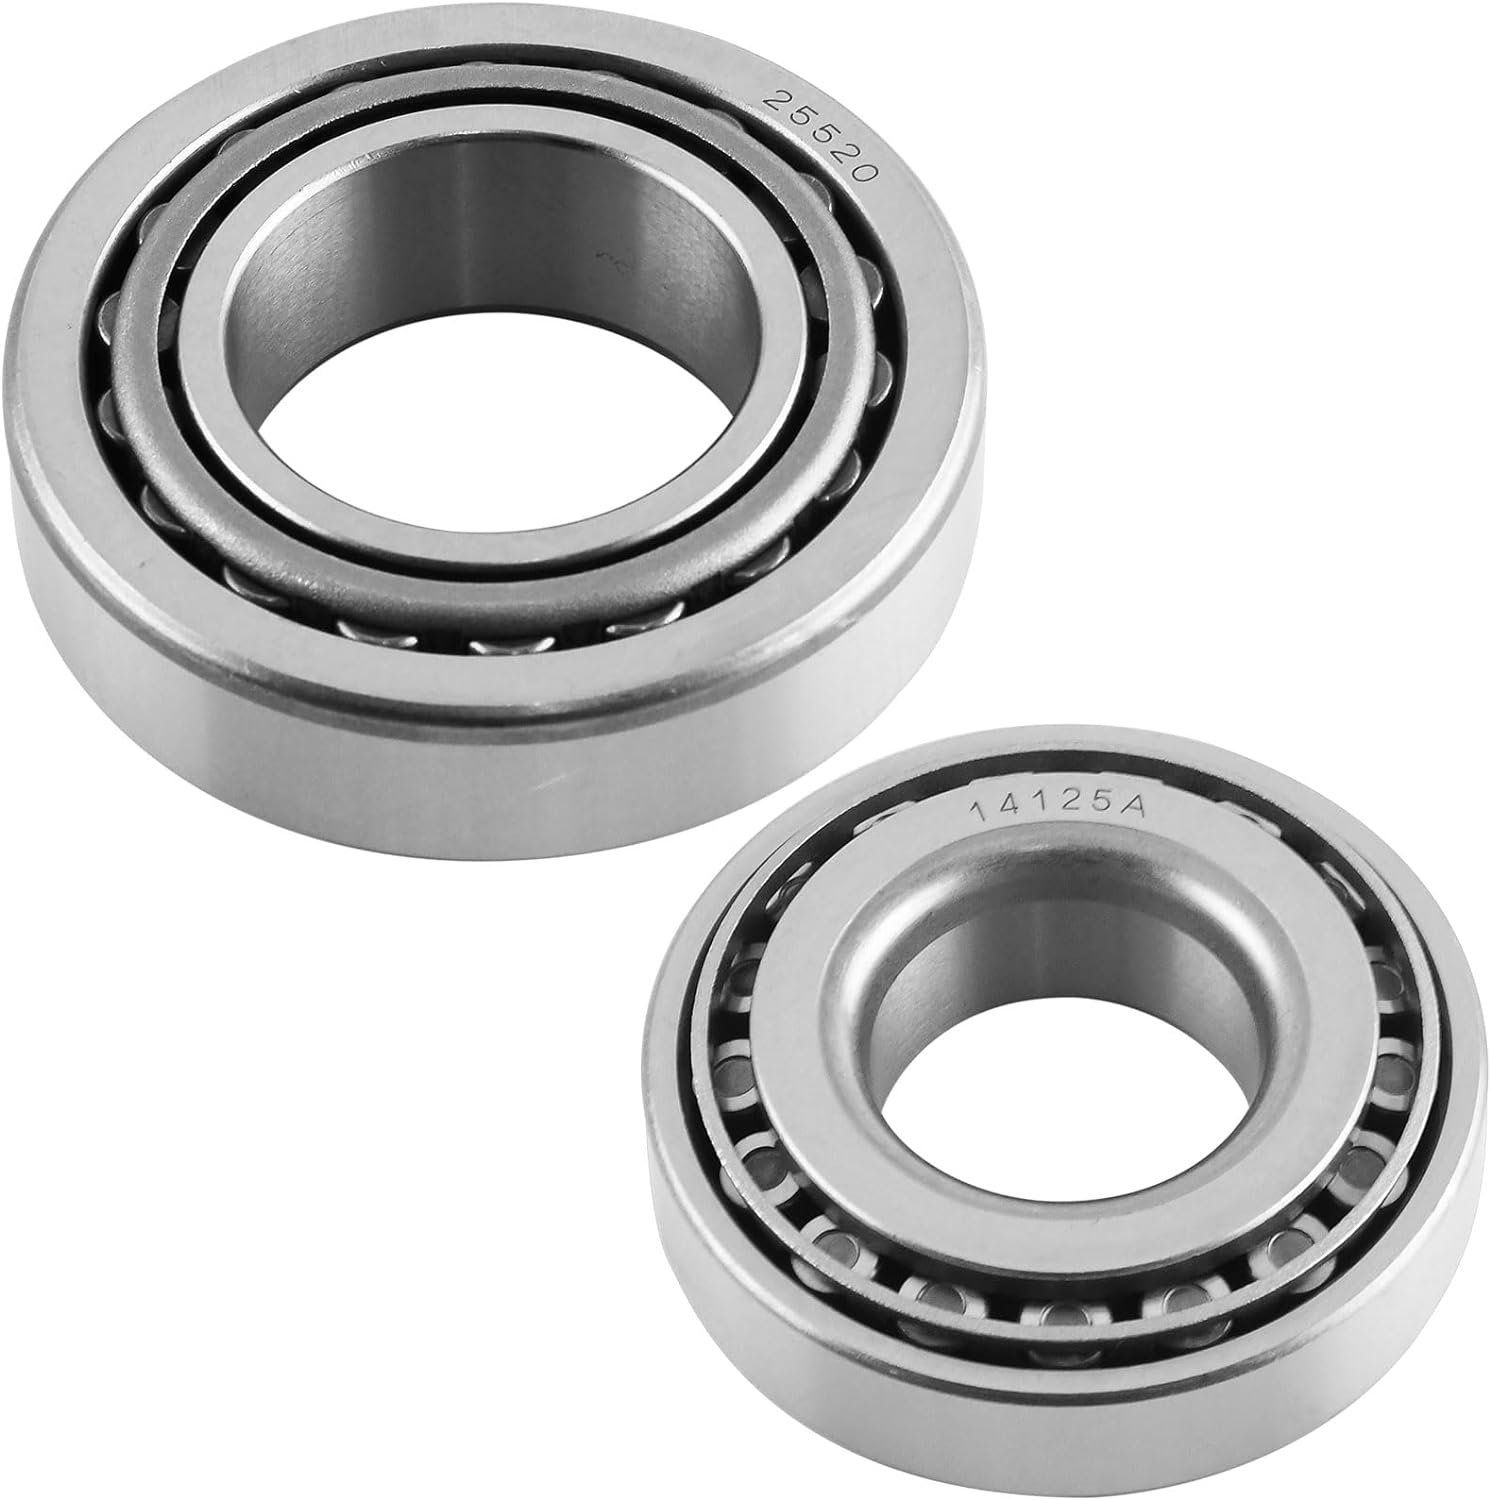 Rolling bearing for a trailer.